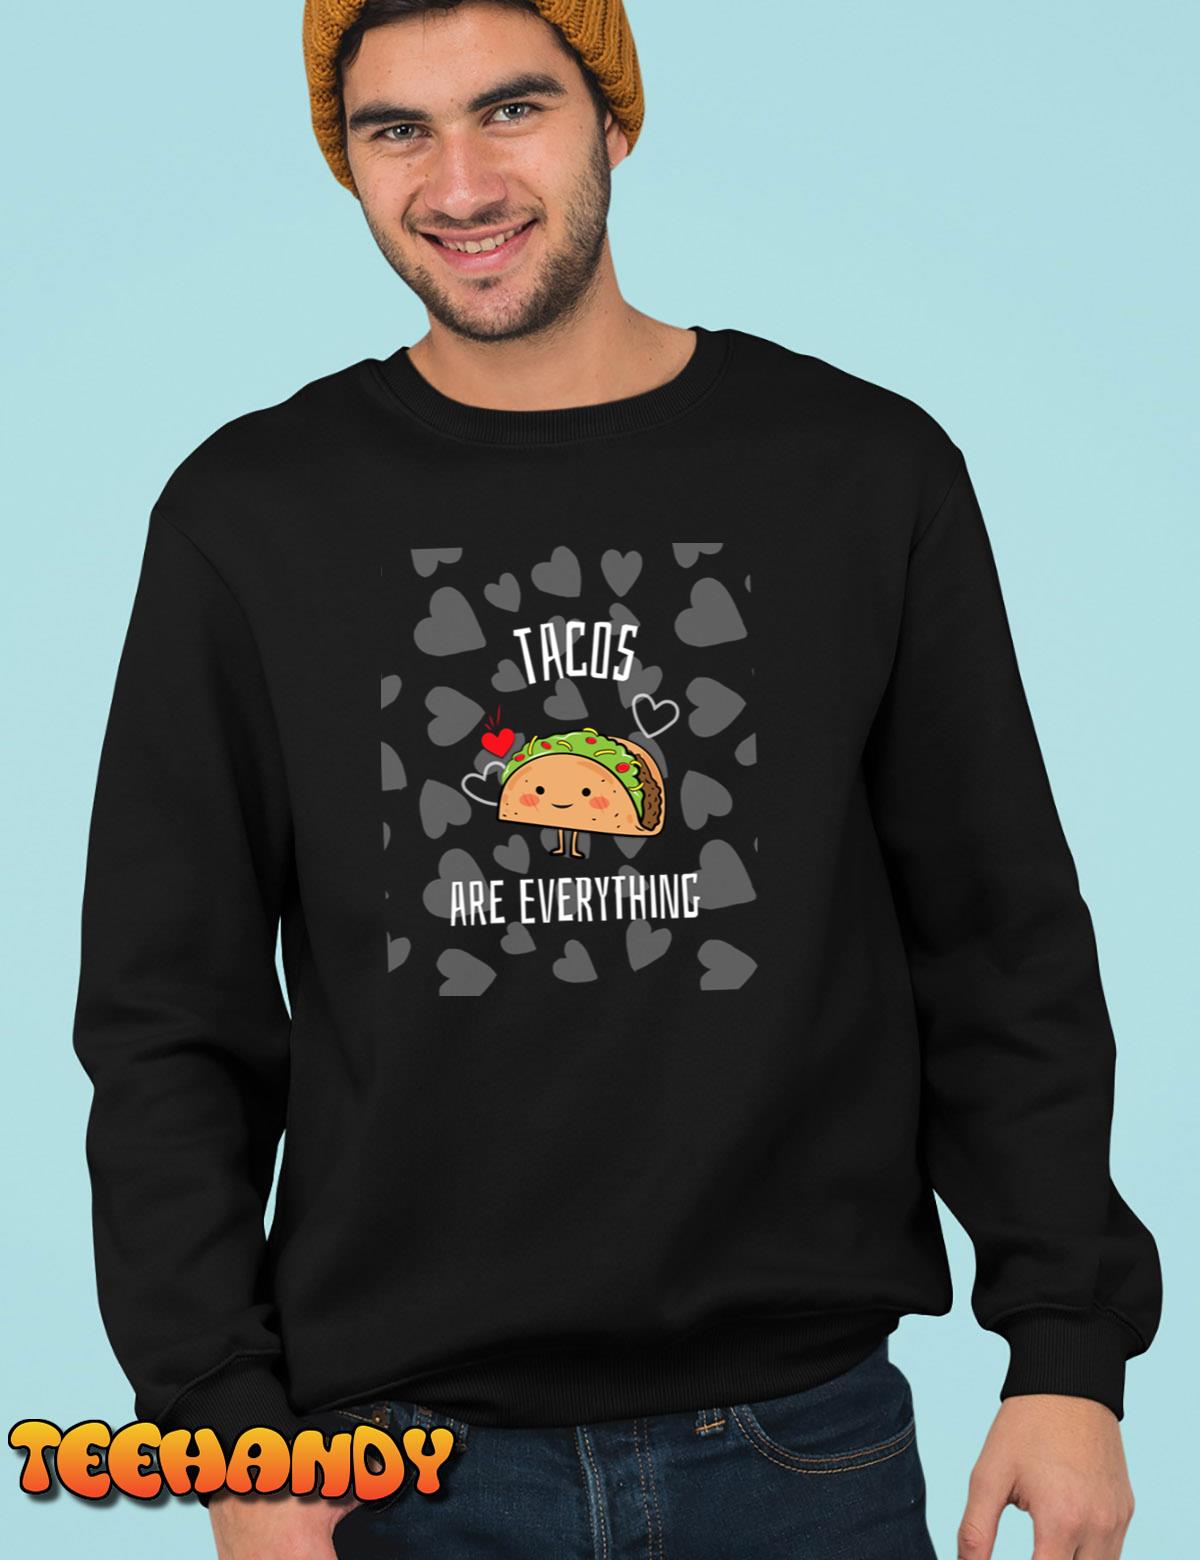 Tacos Are Everything (14) T-Shirt